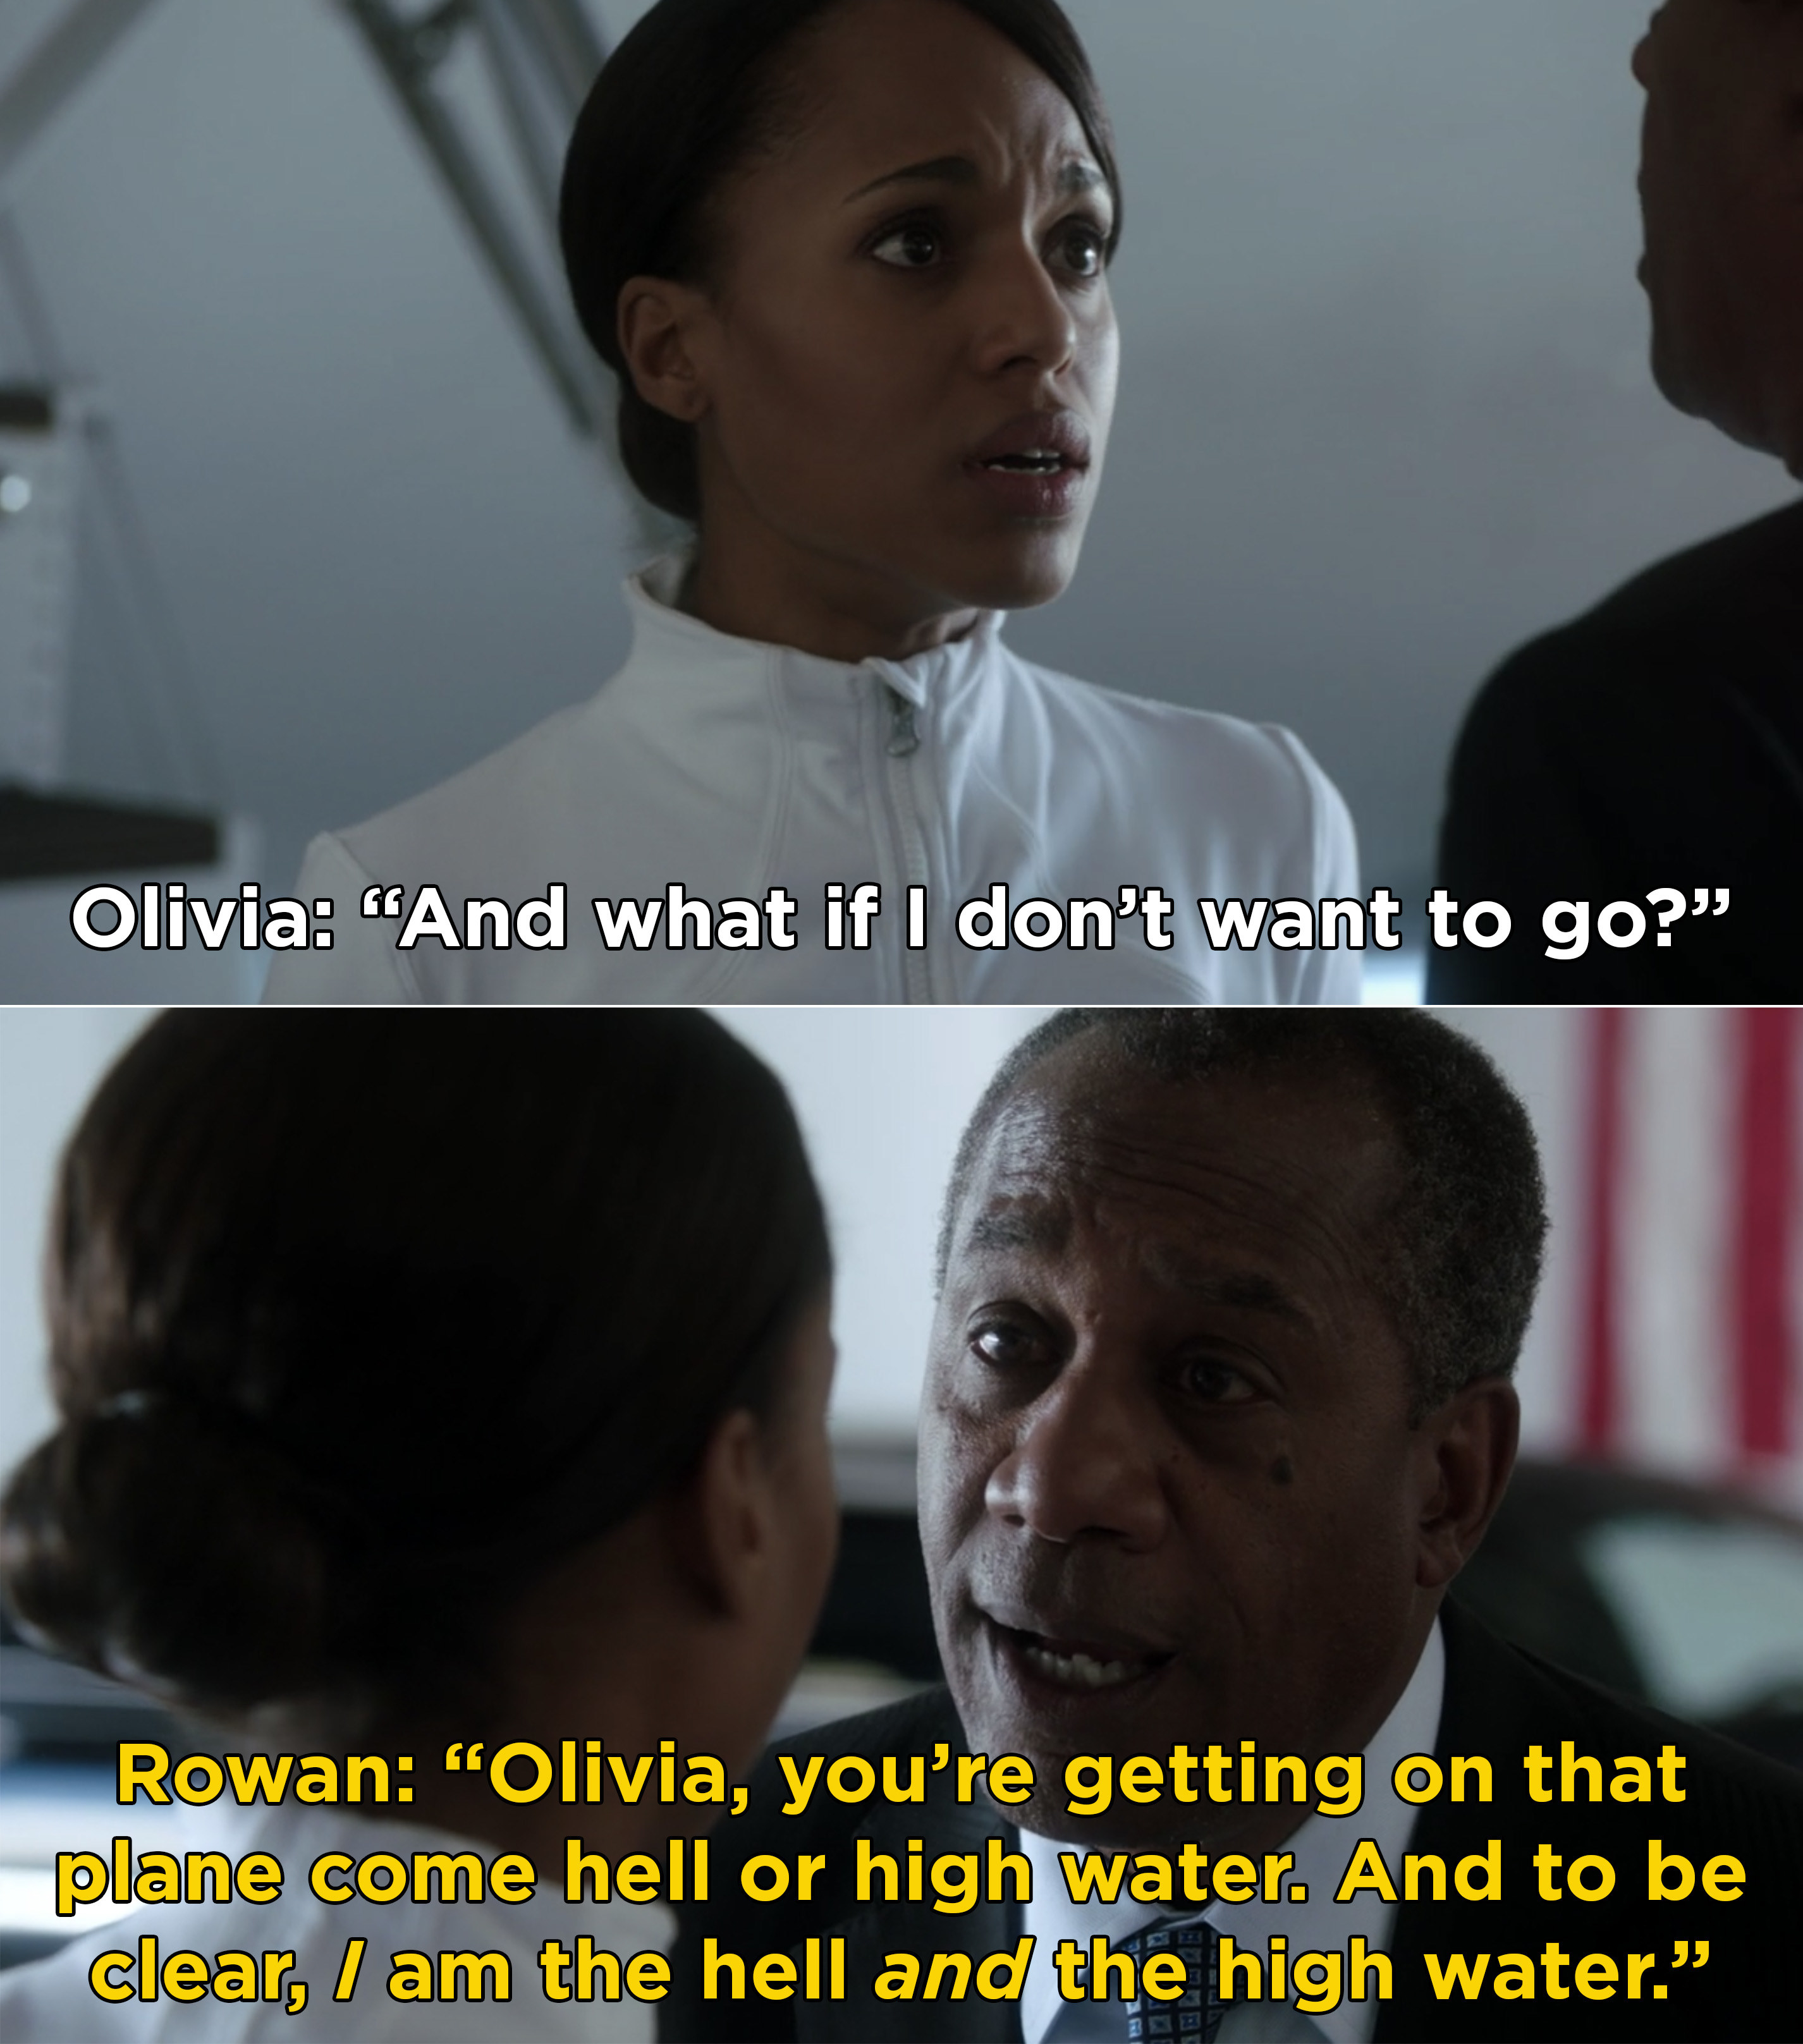 Rowan telling Olivia, &quot;Olivia, you’re getting on that plane come hell or high water. And to be clear, I am the hell and the high water&quot;